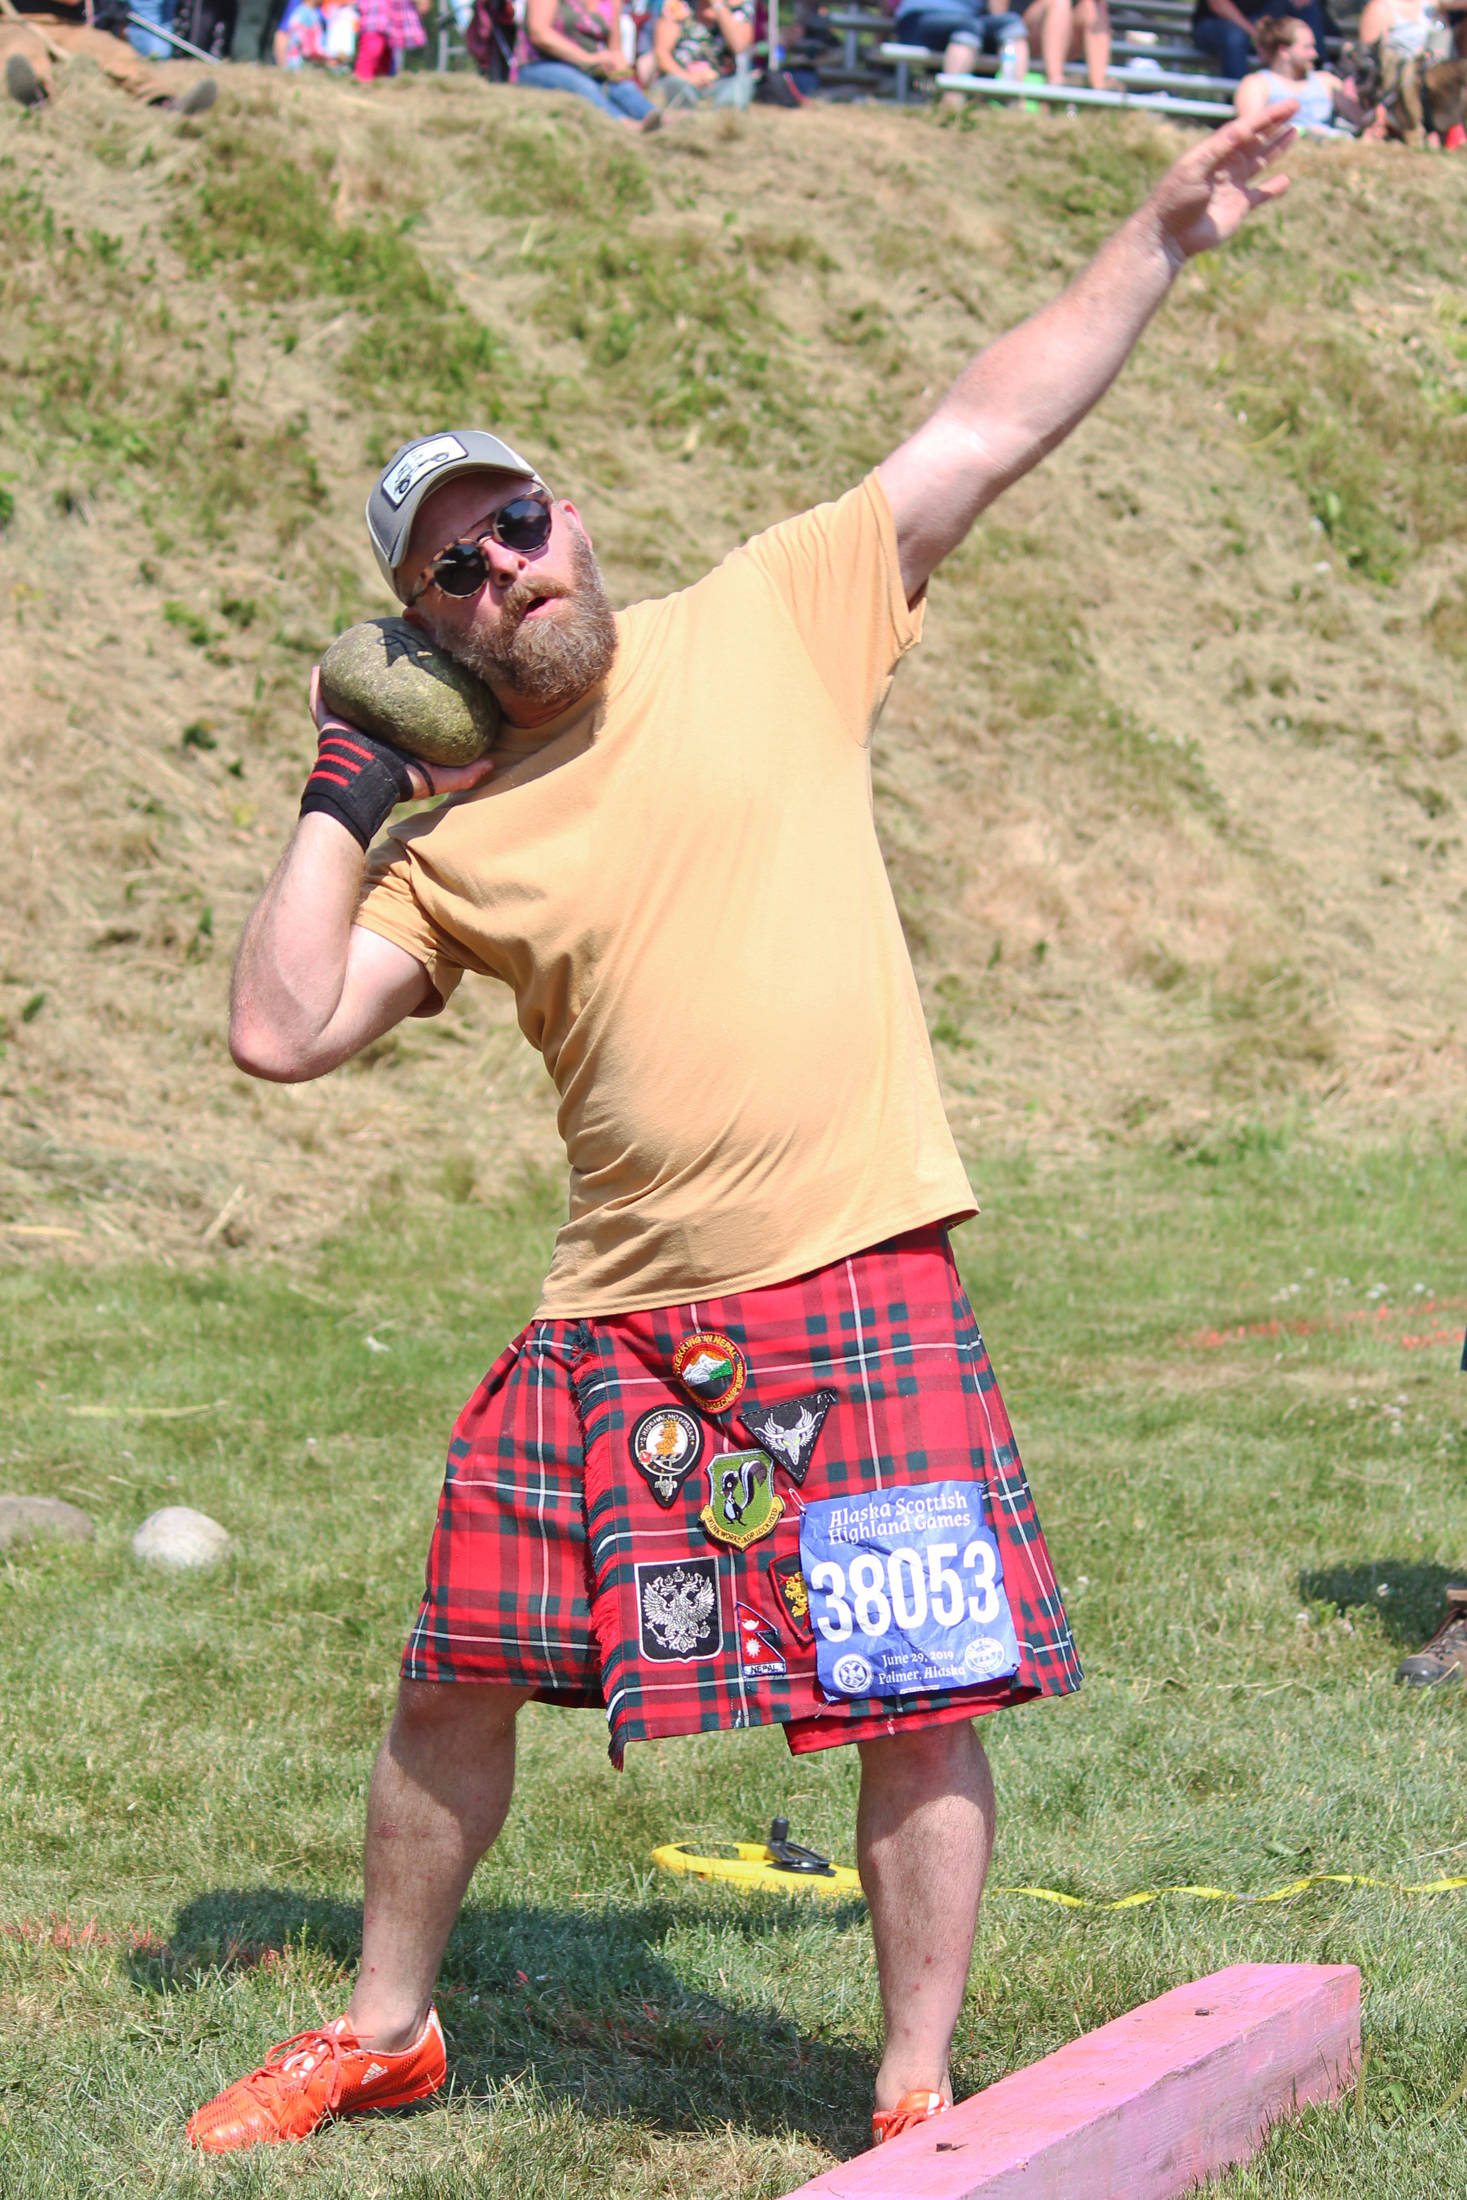 Photos by Megan Pacer | Homer News                                Dan Gregory of Boise, Idaho prepares to throw a Braemar stone during the Braemar stone put event of the Kachemak Bay Highland Games, held Saturday, July 6, at Karen Hornaday Park in Homer.